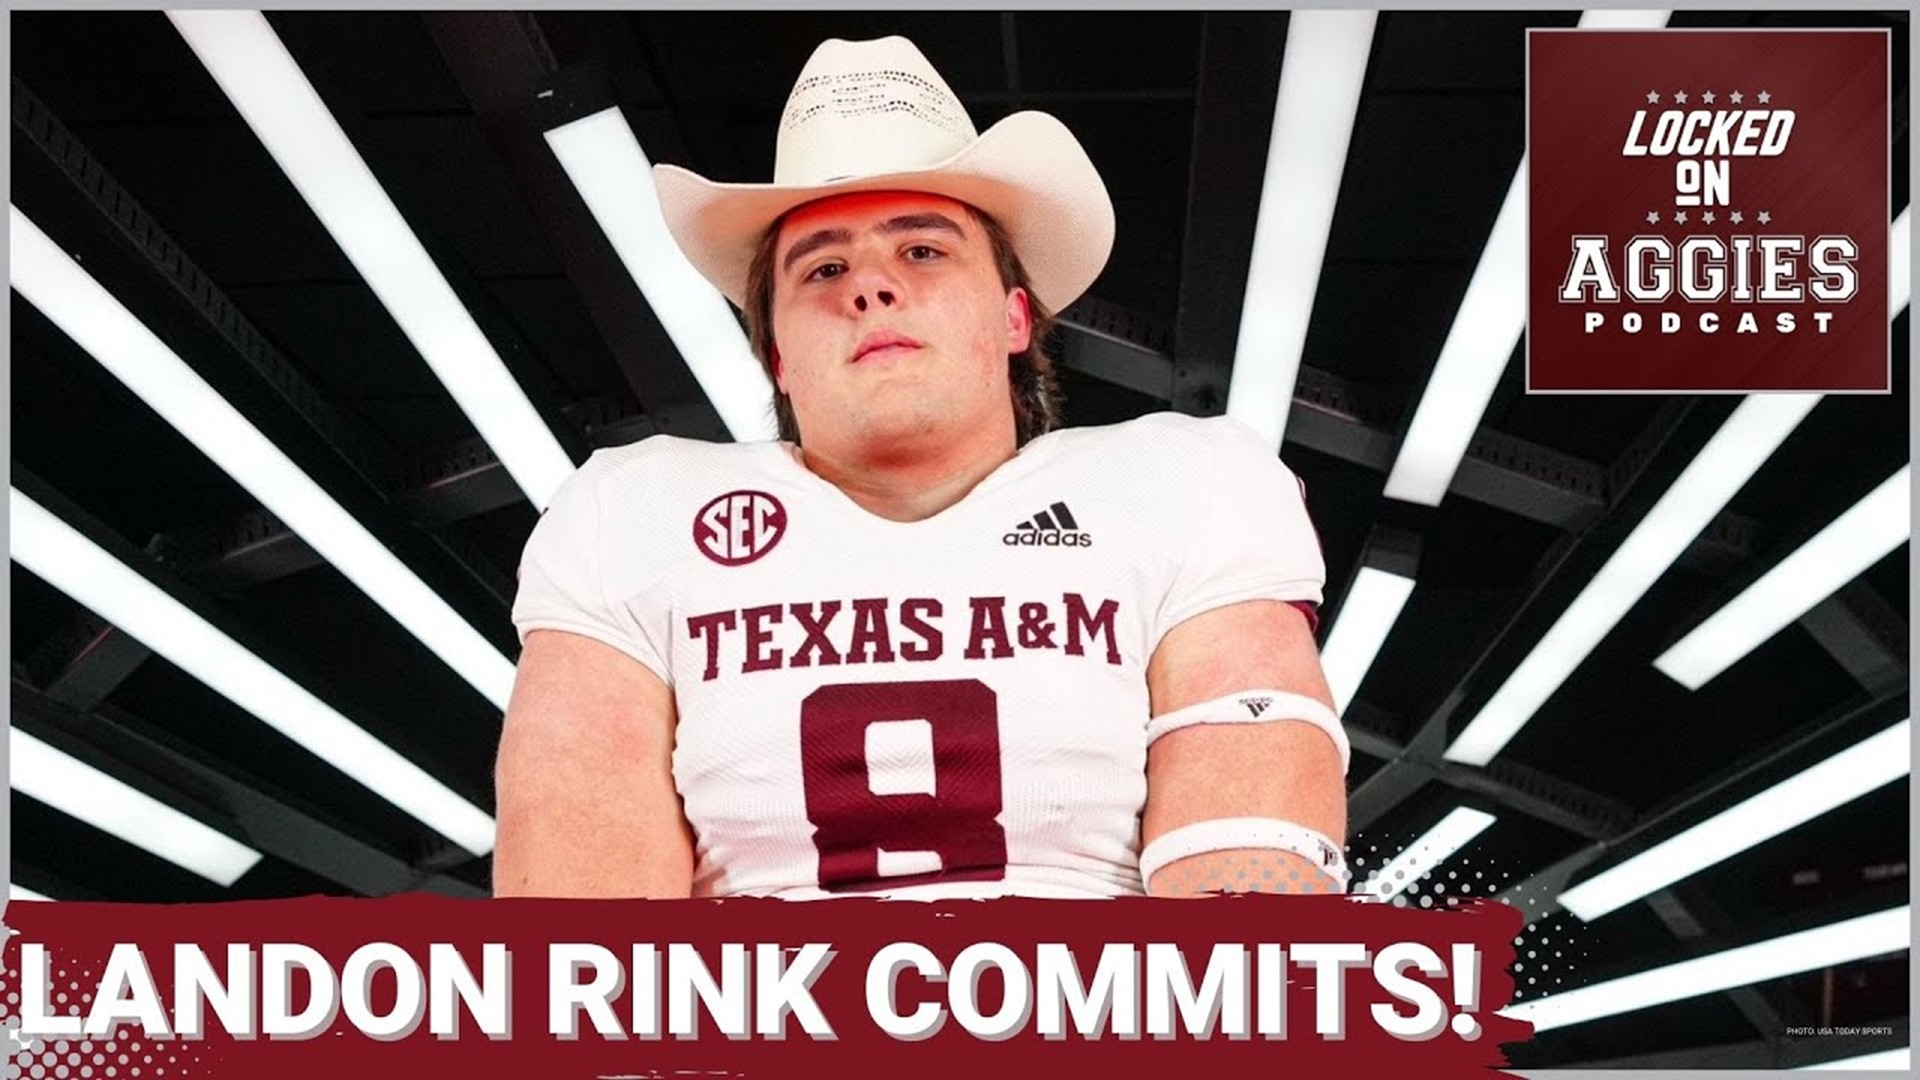 On today's episode of Locked On Aggies, host Andrew Stefaniak discussed four-star defensive lineman Landon Rink's decision to join the Texas A&M Aggies